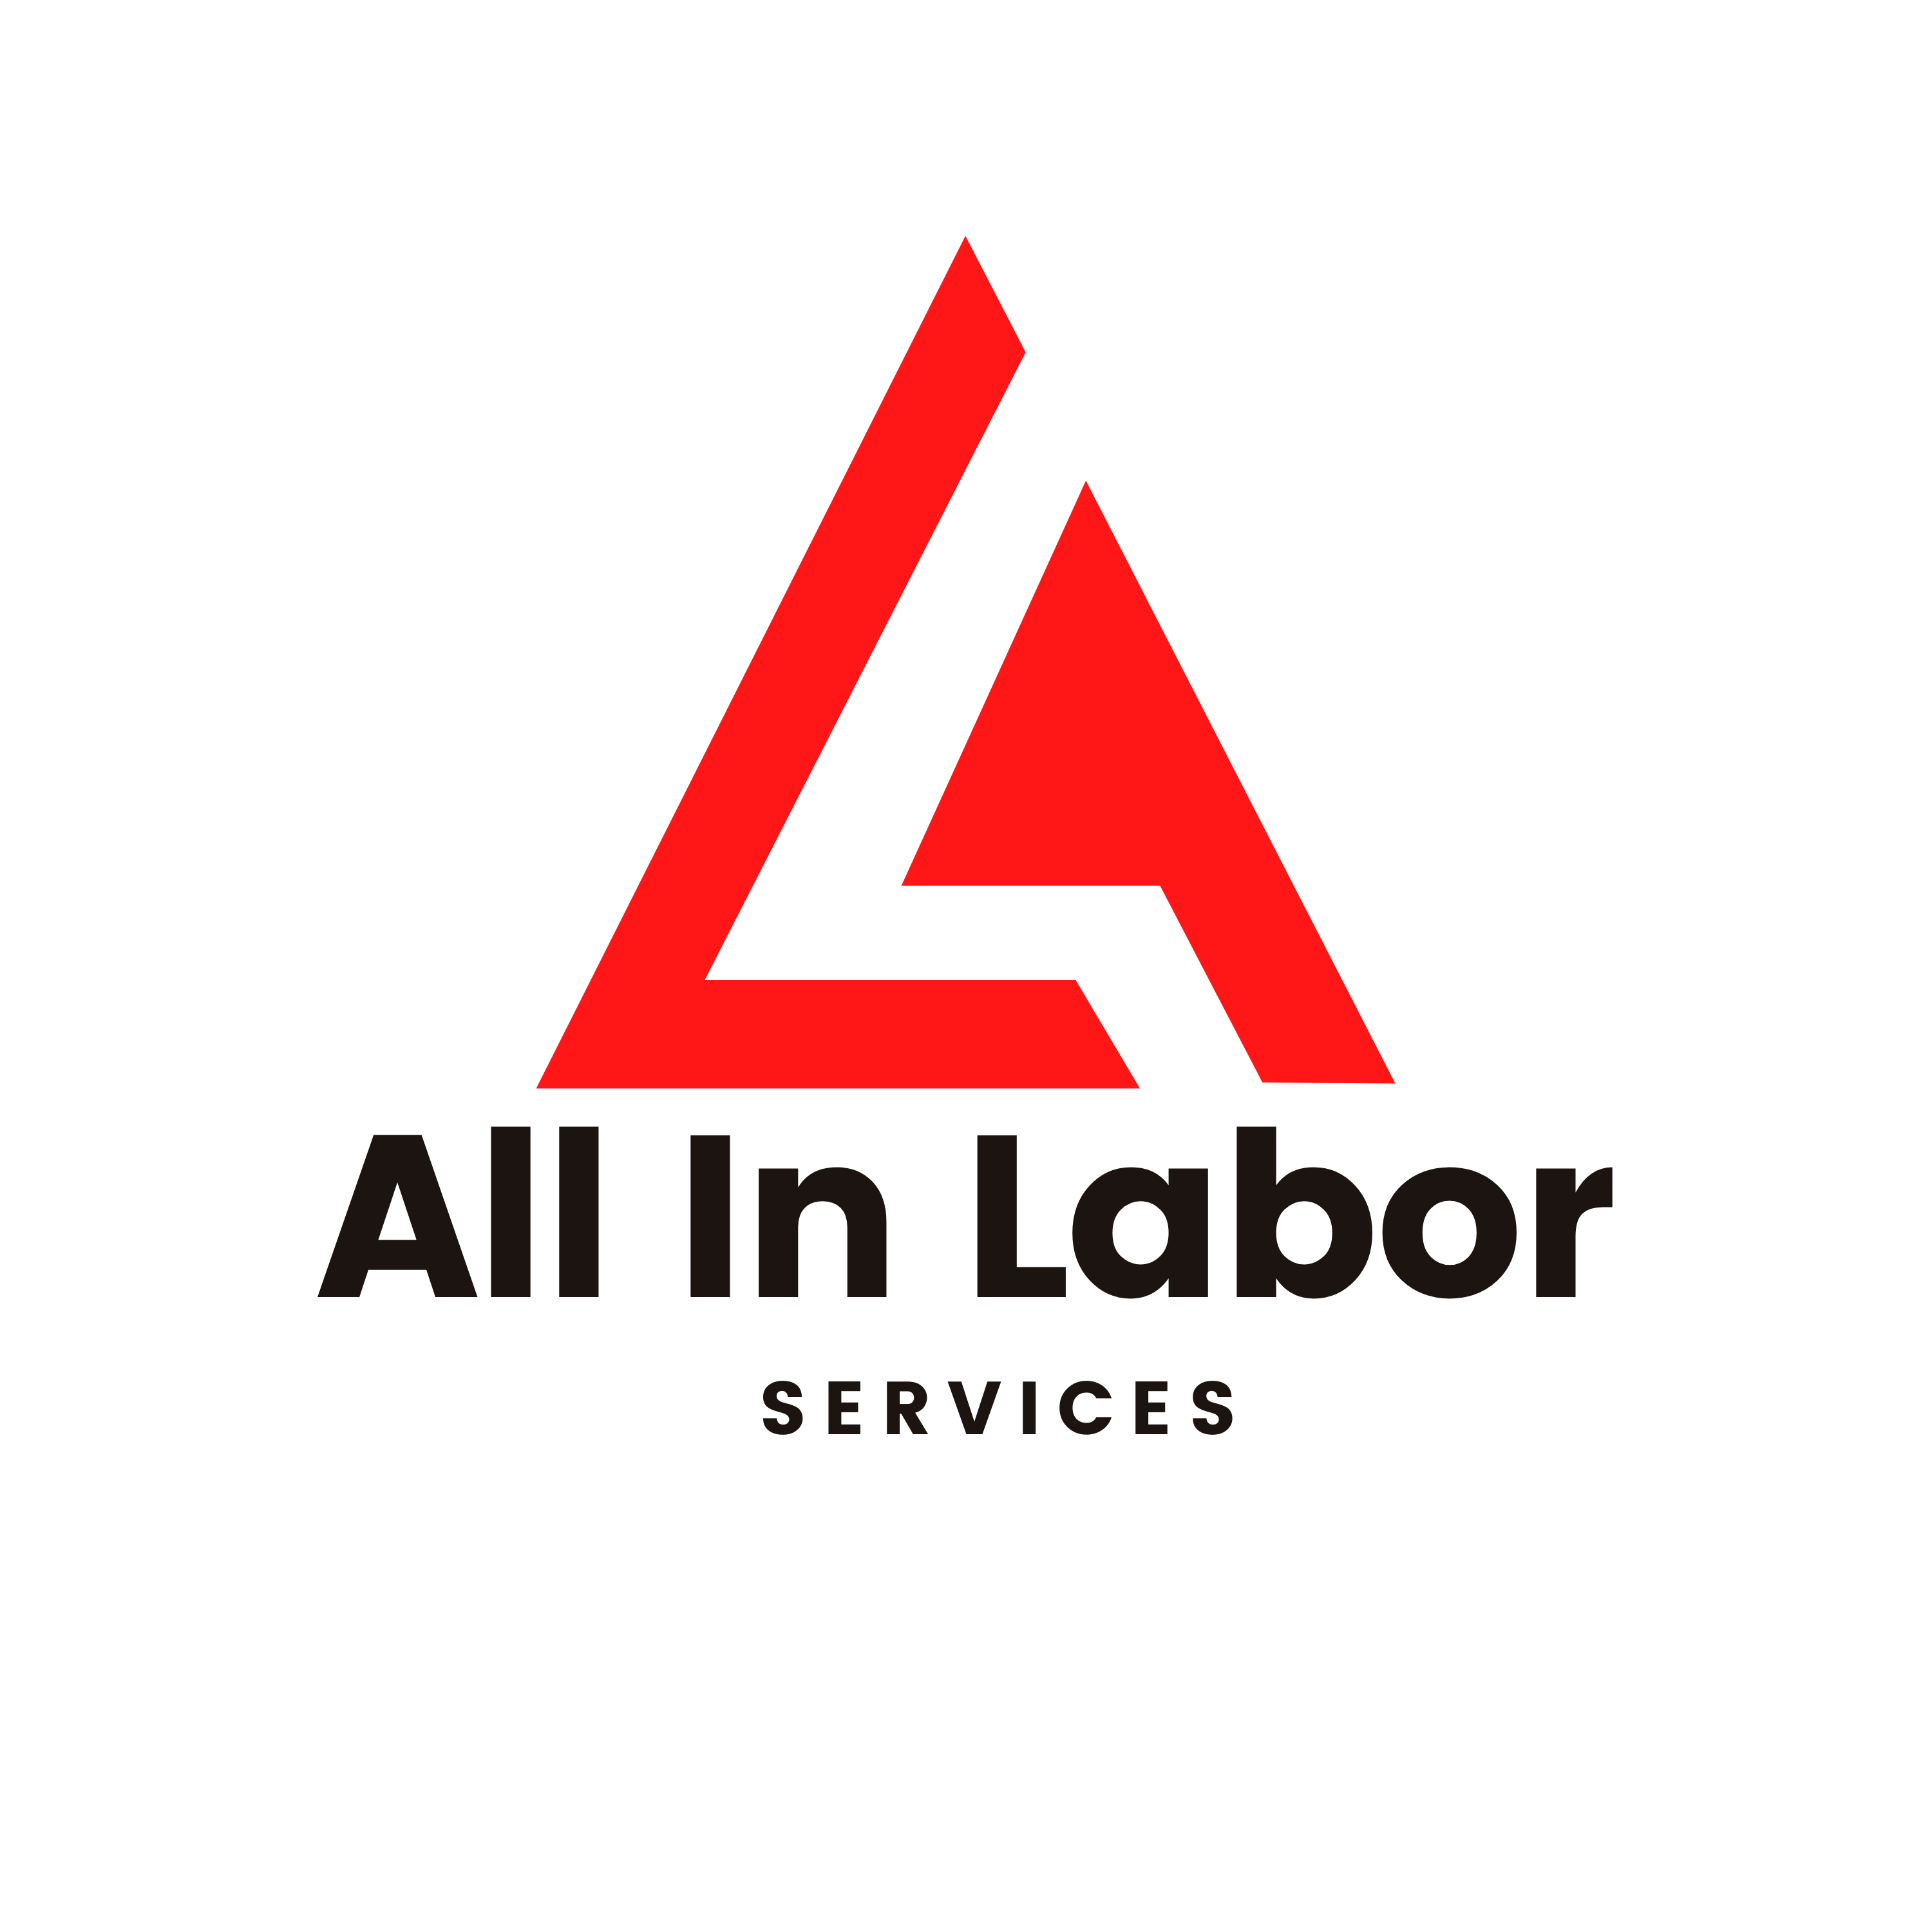 All in Labor Services of Virginia